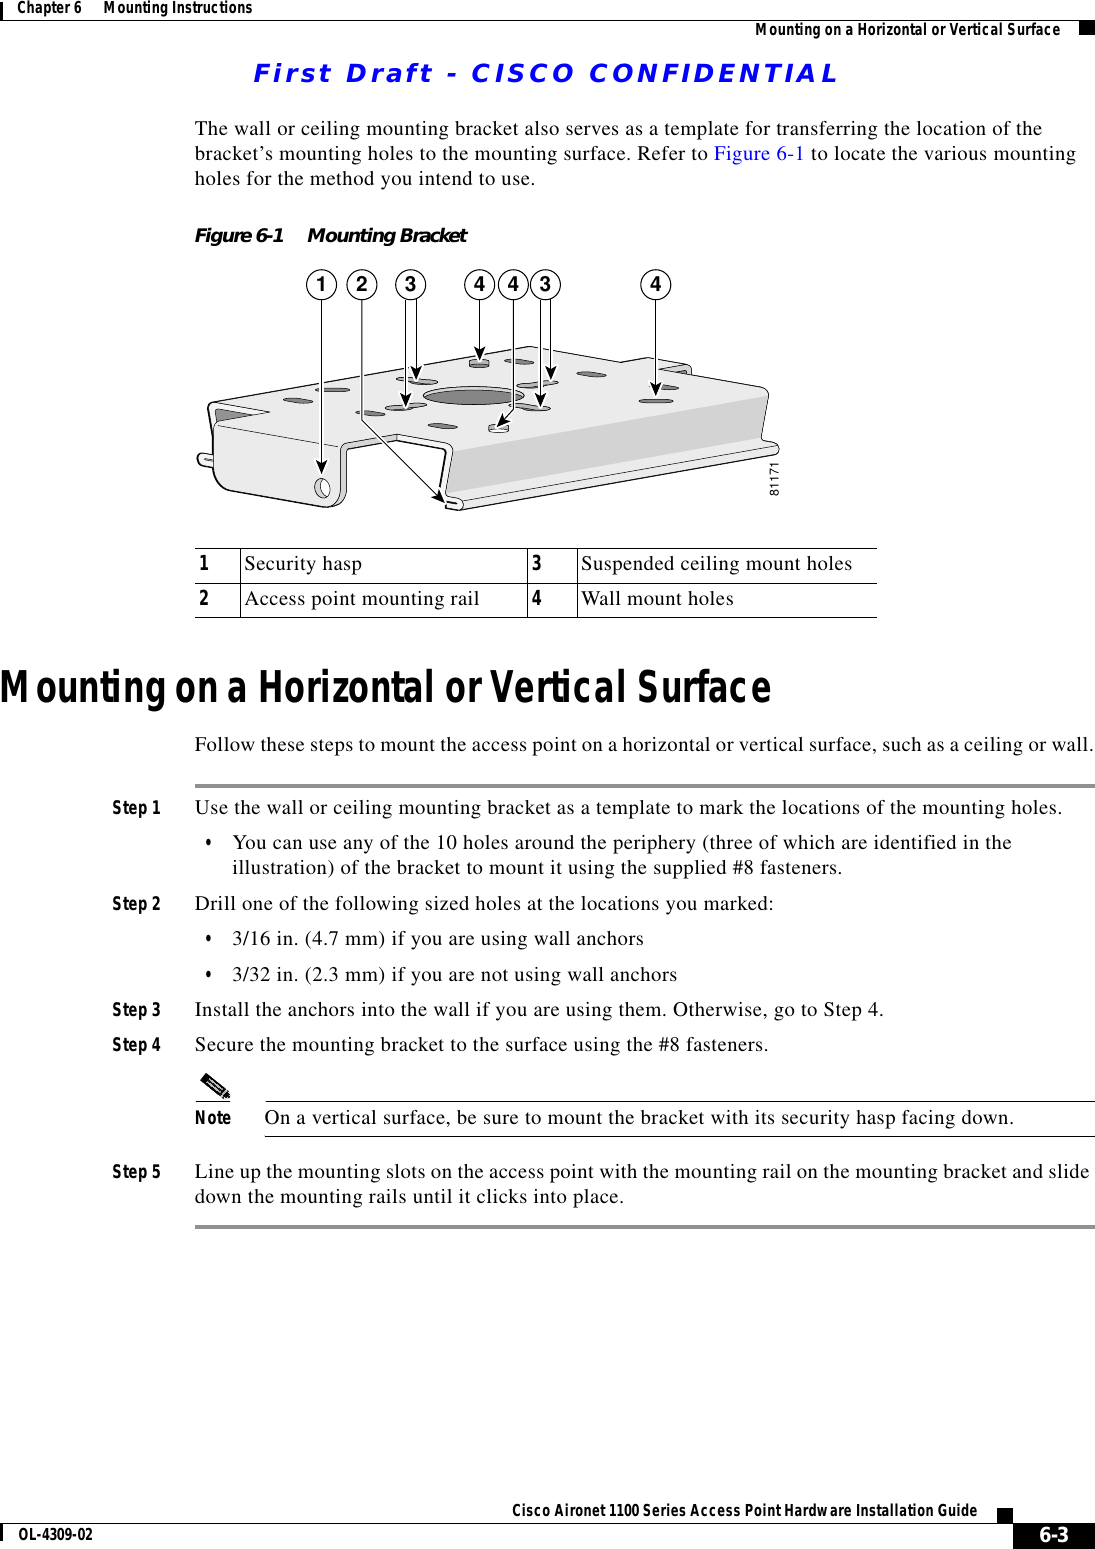 First Draft - CISCO CONFIDENTIAL6-3Cisco Aironet 1100 Series Access Point Hardware Installation GuideOL-4309-02Chapter 6      Mounting Instructions Mounting on a Horizontal or Vertical SurfaceThe wall or ceiling mounting bracket also serves as a template for transferring the location of the bracket’s mounting holes to the mounting surface. Refer to Figure 6-1 to locate the various mounting holes for the method you intend to use.Figure 6-1 Mounting BracketMounting on a Horizontal or Vertical SurfaceFollow these steps to mount the access point on a horizontal or vertical surface, such as a ceiling or wall.Step 1 Use the wall or ceiling mounting bracket as a template to mark the locations of the mounting holes.•You can use any of the 10 holes around the periphery (three of which are identified in the illustration) of the bracket to mount it using the supplied #8 fasteners.Step 2 Drill one of the following sized holes at the locations you marked:•3/16 in. (4.7 mm) if you are using wall anchors•3/32 in. (2.3 mm) if you are not using wall anchorsStep 3 Install the anchors into the wall if you are using them. Otherwise, go to Step 4.Step 4 Secure the mounting bracket to the surface using the #8 fasteners.Note On a vertical surface, be sure to mount the bracket with its security hasp facing down.Step 5 Line up the mounting slots on the access point with the mounting rail on the mounting bracket and slide down the mounting rails until it clicks into place.811711 4 43 3 421Security hasp 3Suspended ceiling mount holes2Access point mounting rail 4Wall mount holes